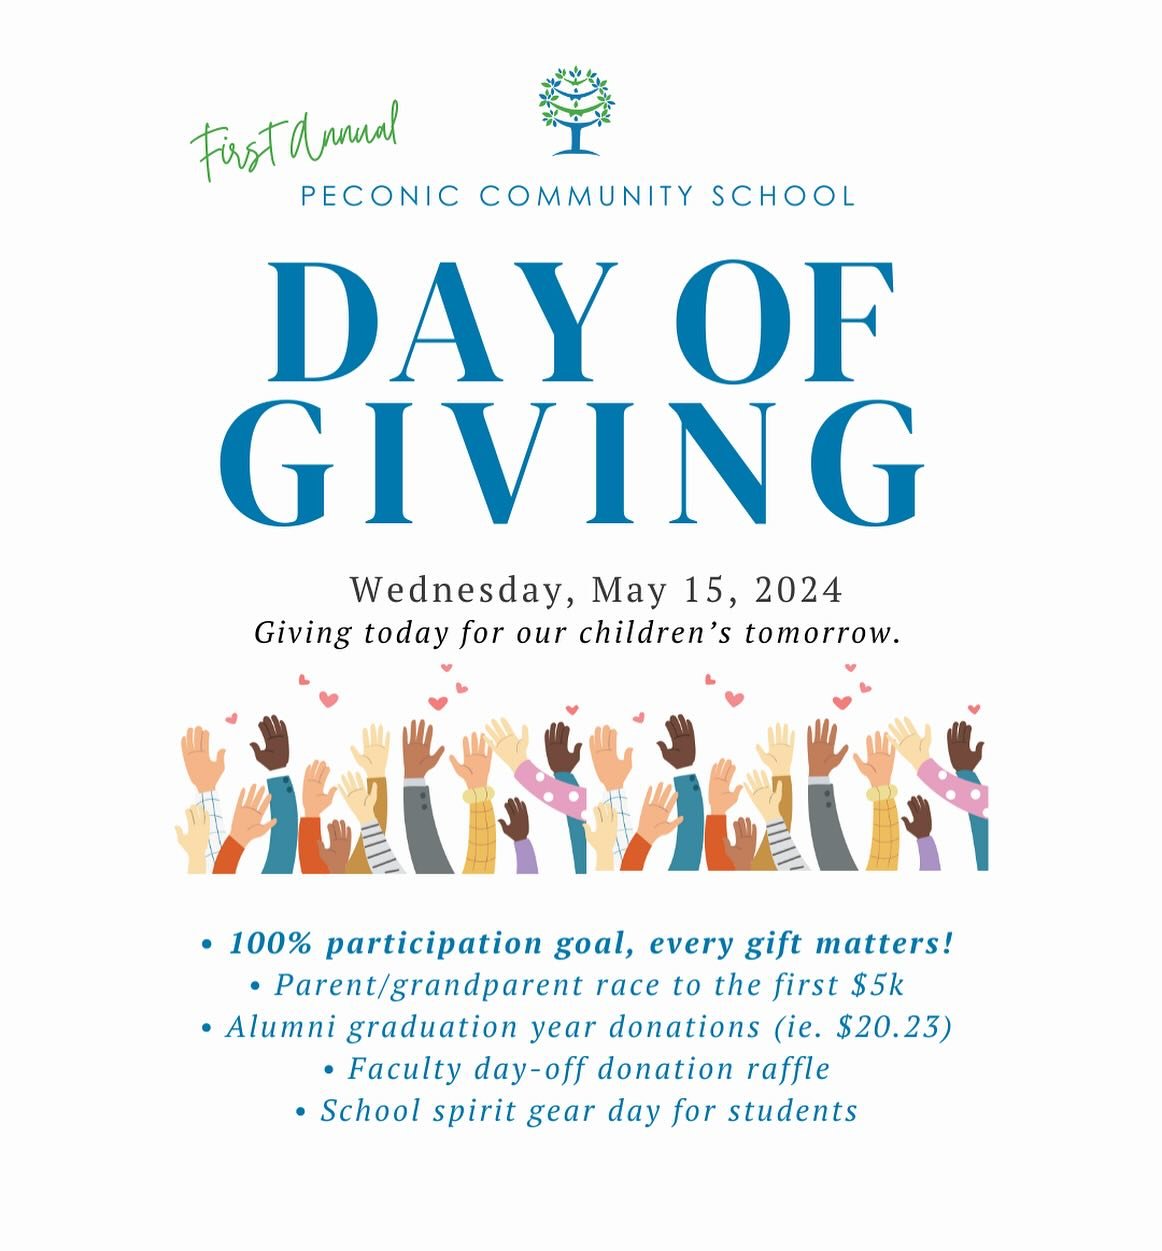 It&rsquo;s almost here! Peconic Community School&rsquo;s First Annual Giving Day &ndash; is tomorrow, Wednesday, May 15th, and we hope every member of our school community &ndash; parents, grandparents, alumni, faculty and staff &ndash; will join han